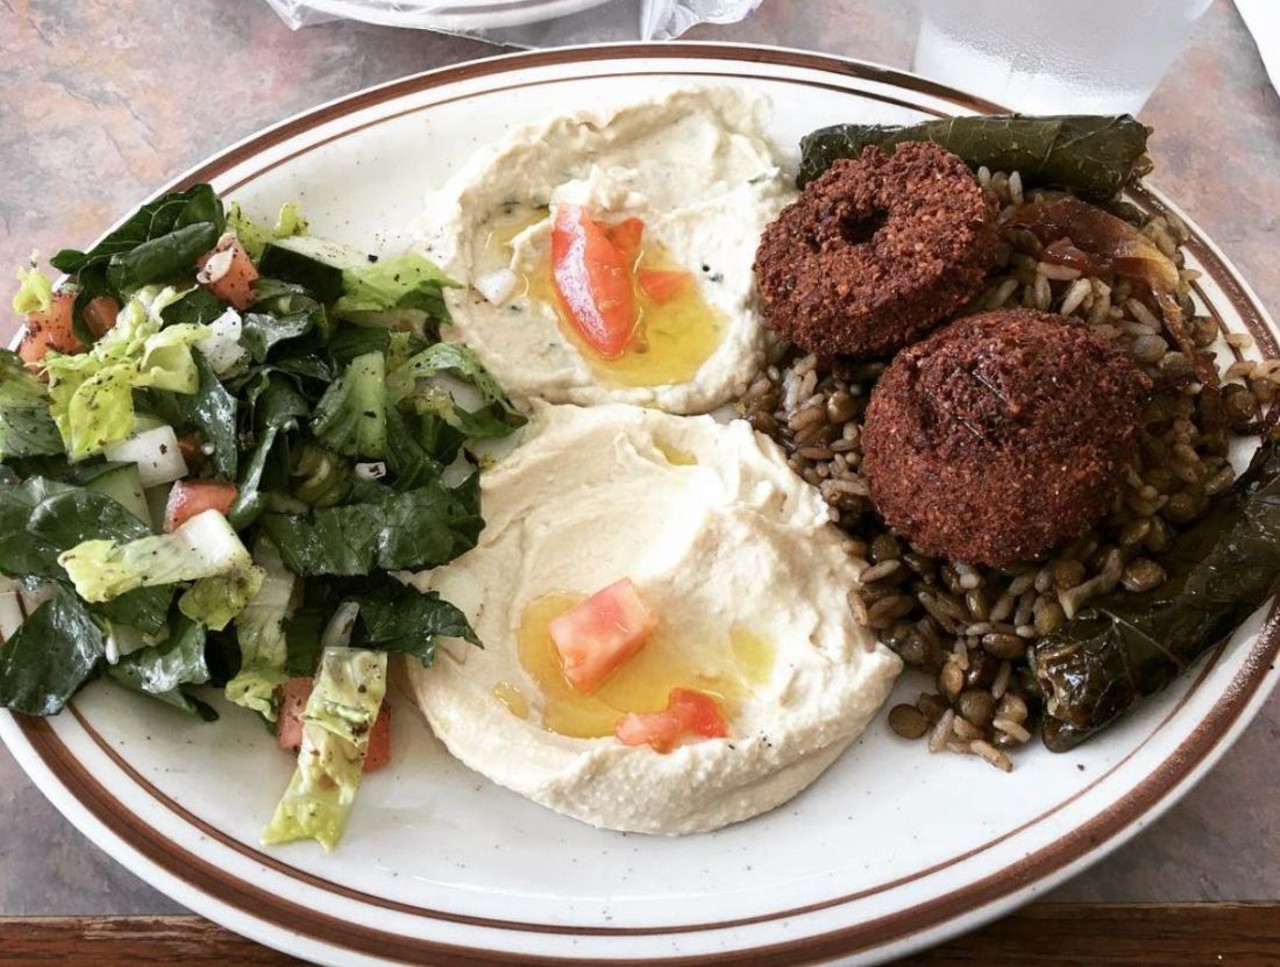 Frank&#146;s Falafel House
216-631-3300, 1823 W. 65th St.
Frank&#146;s serves healthy Middle Eastern food, including a variety of vegetarian platters with generous and beautiful portions.  
Photo via veggirlscle/Instagram